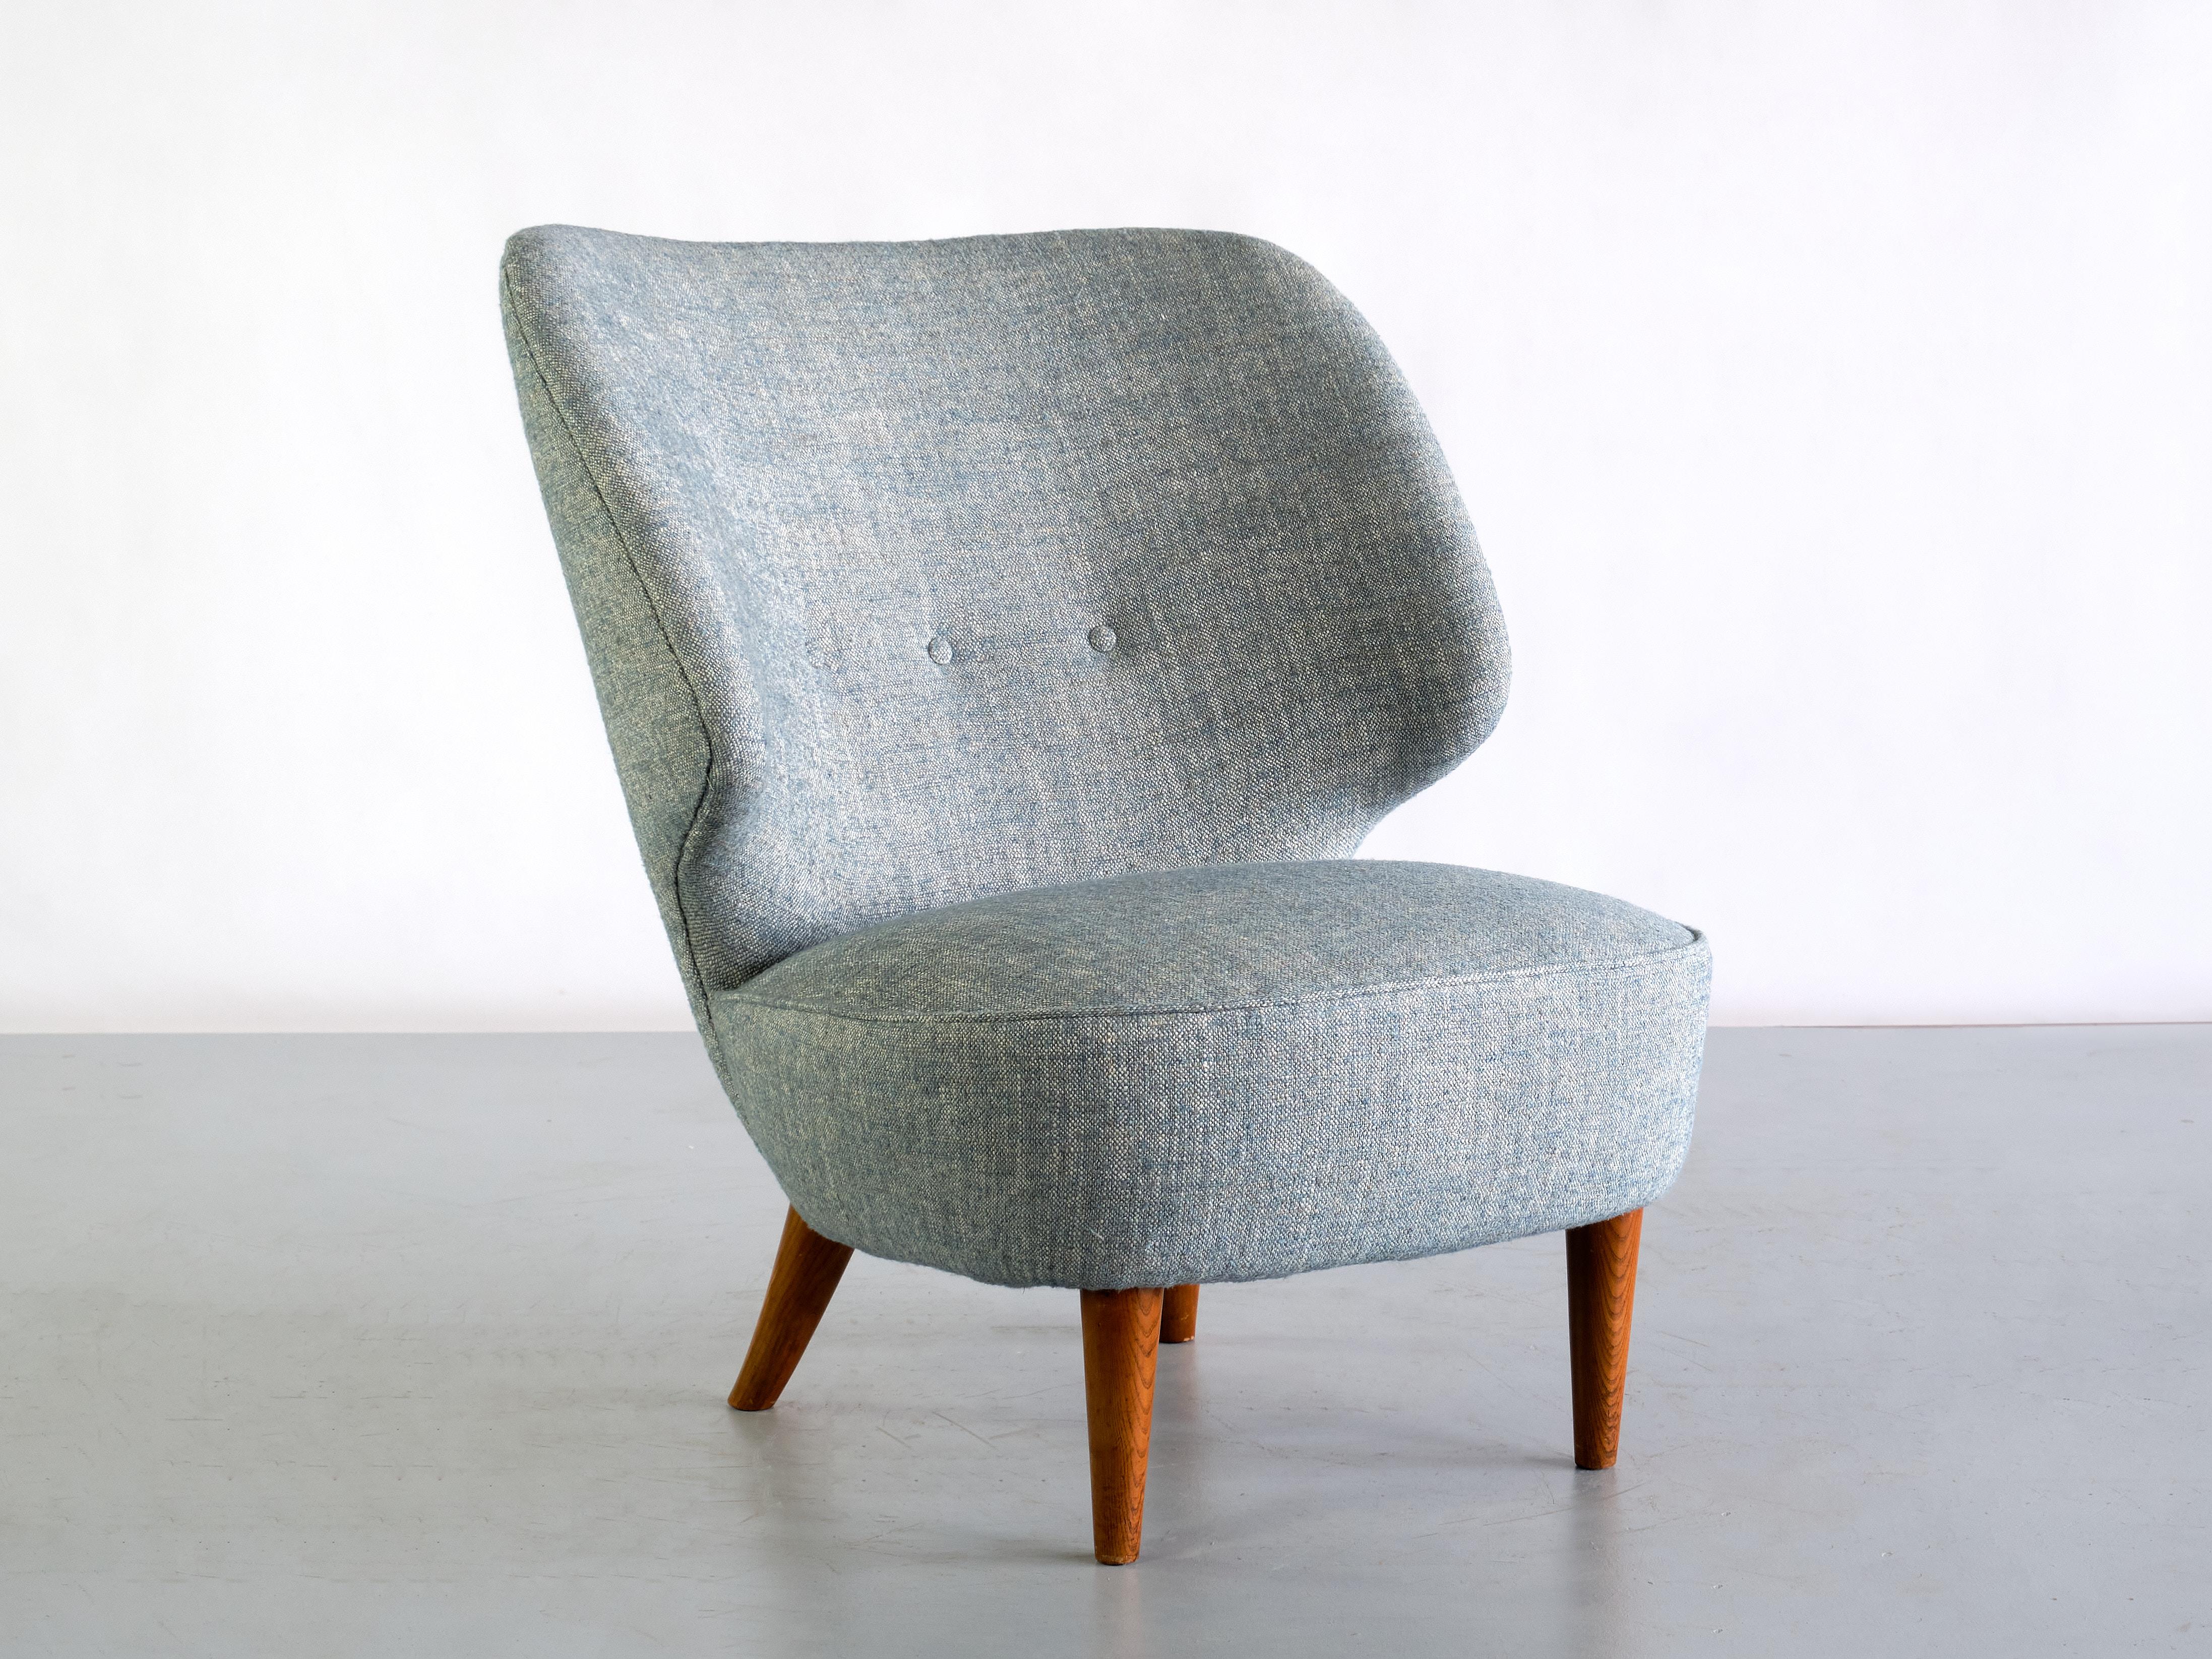 This rare easy chair was designed by Sven Staaf in the early 1950s. This particular model number 1765 was manufactured by Almgren & Staaf in Helsingborg, Sweden.
The design is marked by the curved lines of the back rest and the rounded seat. The